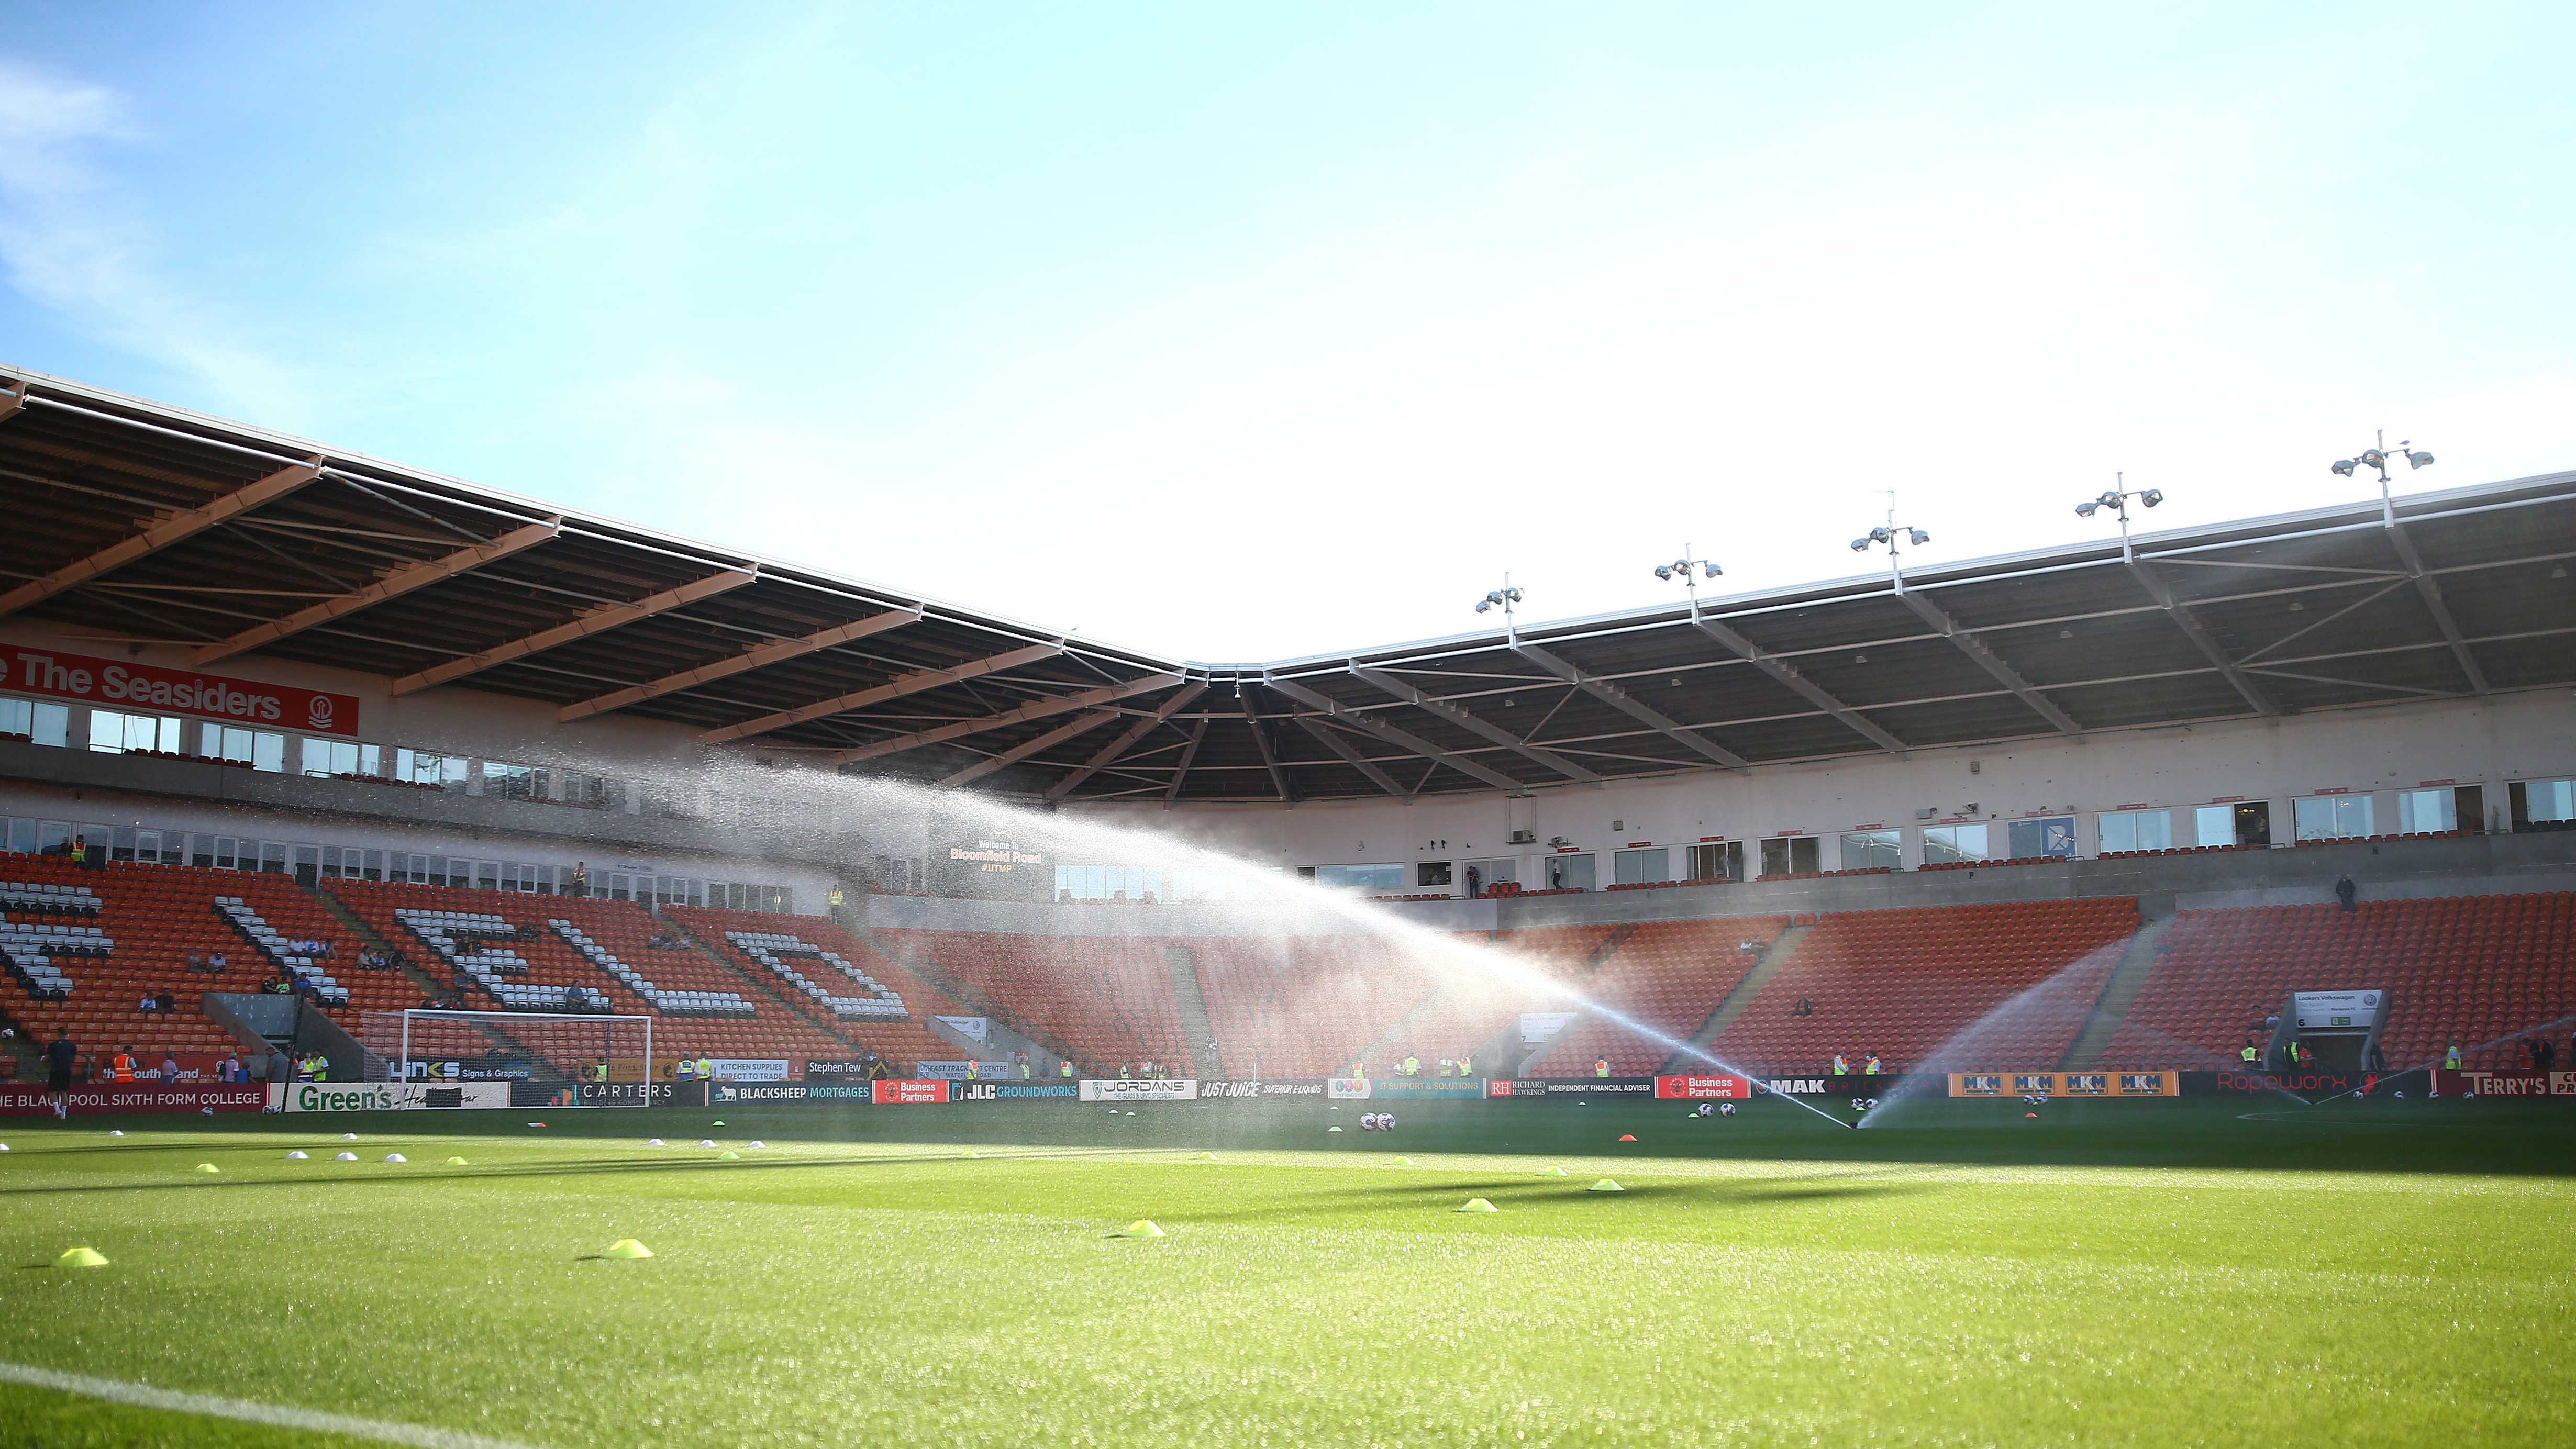 Sprinklers water the pitch at Bloomfield Road